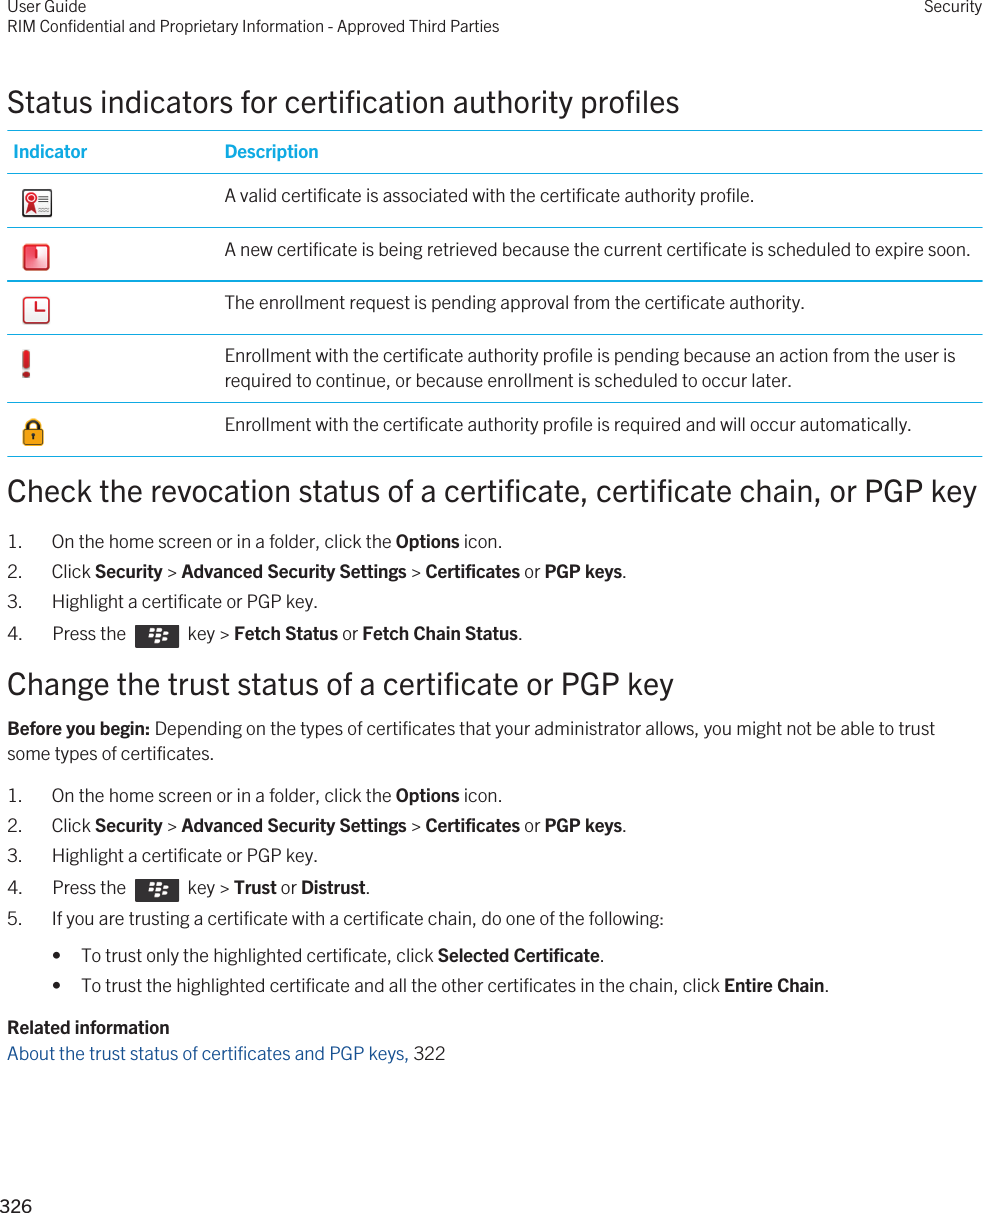 Status indicators for certification authority profilesIndicator Description A valid certificate is associated with the certificate authority profile. A new certificate is being retrieved because the current certificate is scheduled to expire soon. The enrollment request is pending approval from the certificate authority. Enrollment with the certificate authority profile is pending because an action from the user is required to continue, or because enrollment is scheduled to occur later. Enrollment with the certificate authority profile is required and will occur automatically.Check the revocation status of a certificate, certificate chain, or PGP key1. On the home screen or in a folder, click the Options icon.2. Click Security &gt; Advanced Security Settings &gt; Certificates or PGP keys.3. Highlight a certificate or PGP key.4.  Press the    key &gt; Fetch Status or Fetch Chain Status. Change the trust status of a certificate or PGP keyBefore you begin: Depending on the types of certificates that your administrator allows, you might not be able to trust some types of certificates.1. On the home screen or in a folder, click the Options icon.2. Click Security &gt; Advanced Security Settings &gt; Certificates or PGP keys.3. Highlight a certificate or PGP key.4.  Press the    key &gt; Trust or Distrust. 5. If you are trusting a certificate with a certificate chain, do one of the following:• To trust only the highlighted certificate, click Selected Certificate.• To trust the highlighted certificate and all the other certificates in the chain, click Entire Chain.Related informationAbout the trust status of certificates and PGP keys, 322 User GuideRIM Confidential and Proprietary Information - Approved Third PartiesSecurity326 